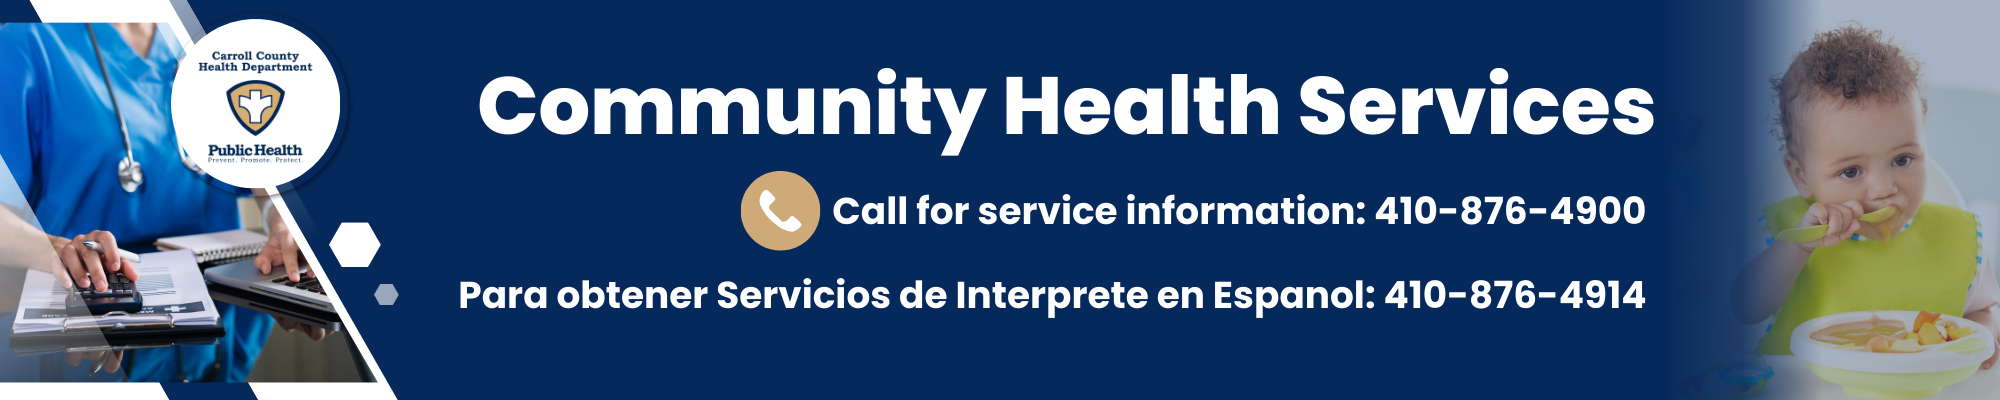 Community Health Service program banner. Call 410-876-4900 for service information. For Spanish, call 410-876-4914.